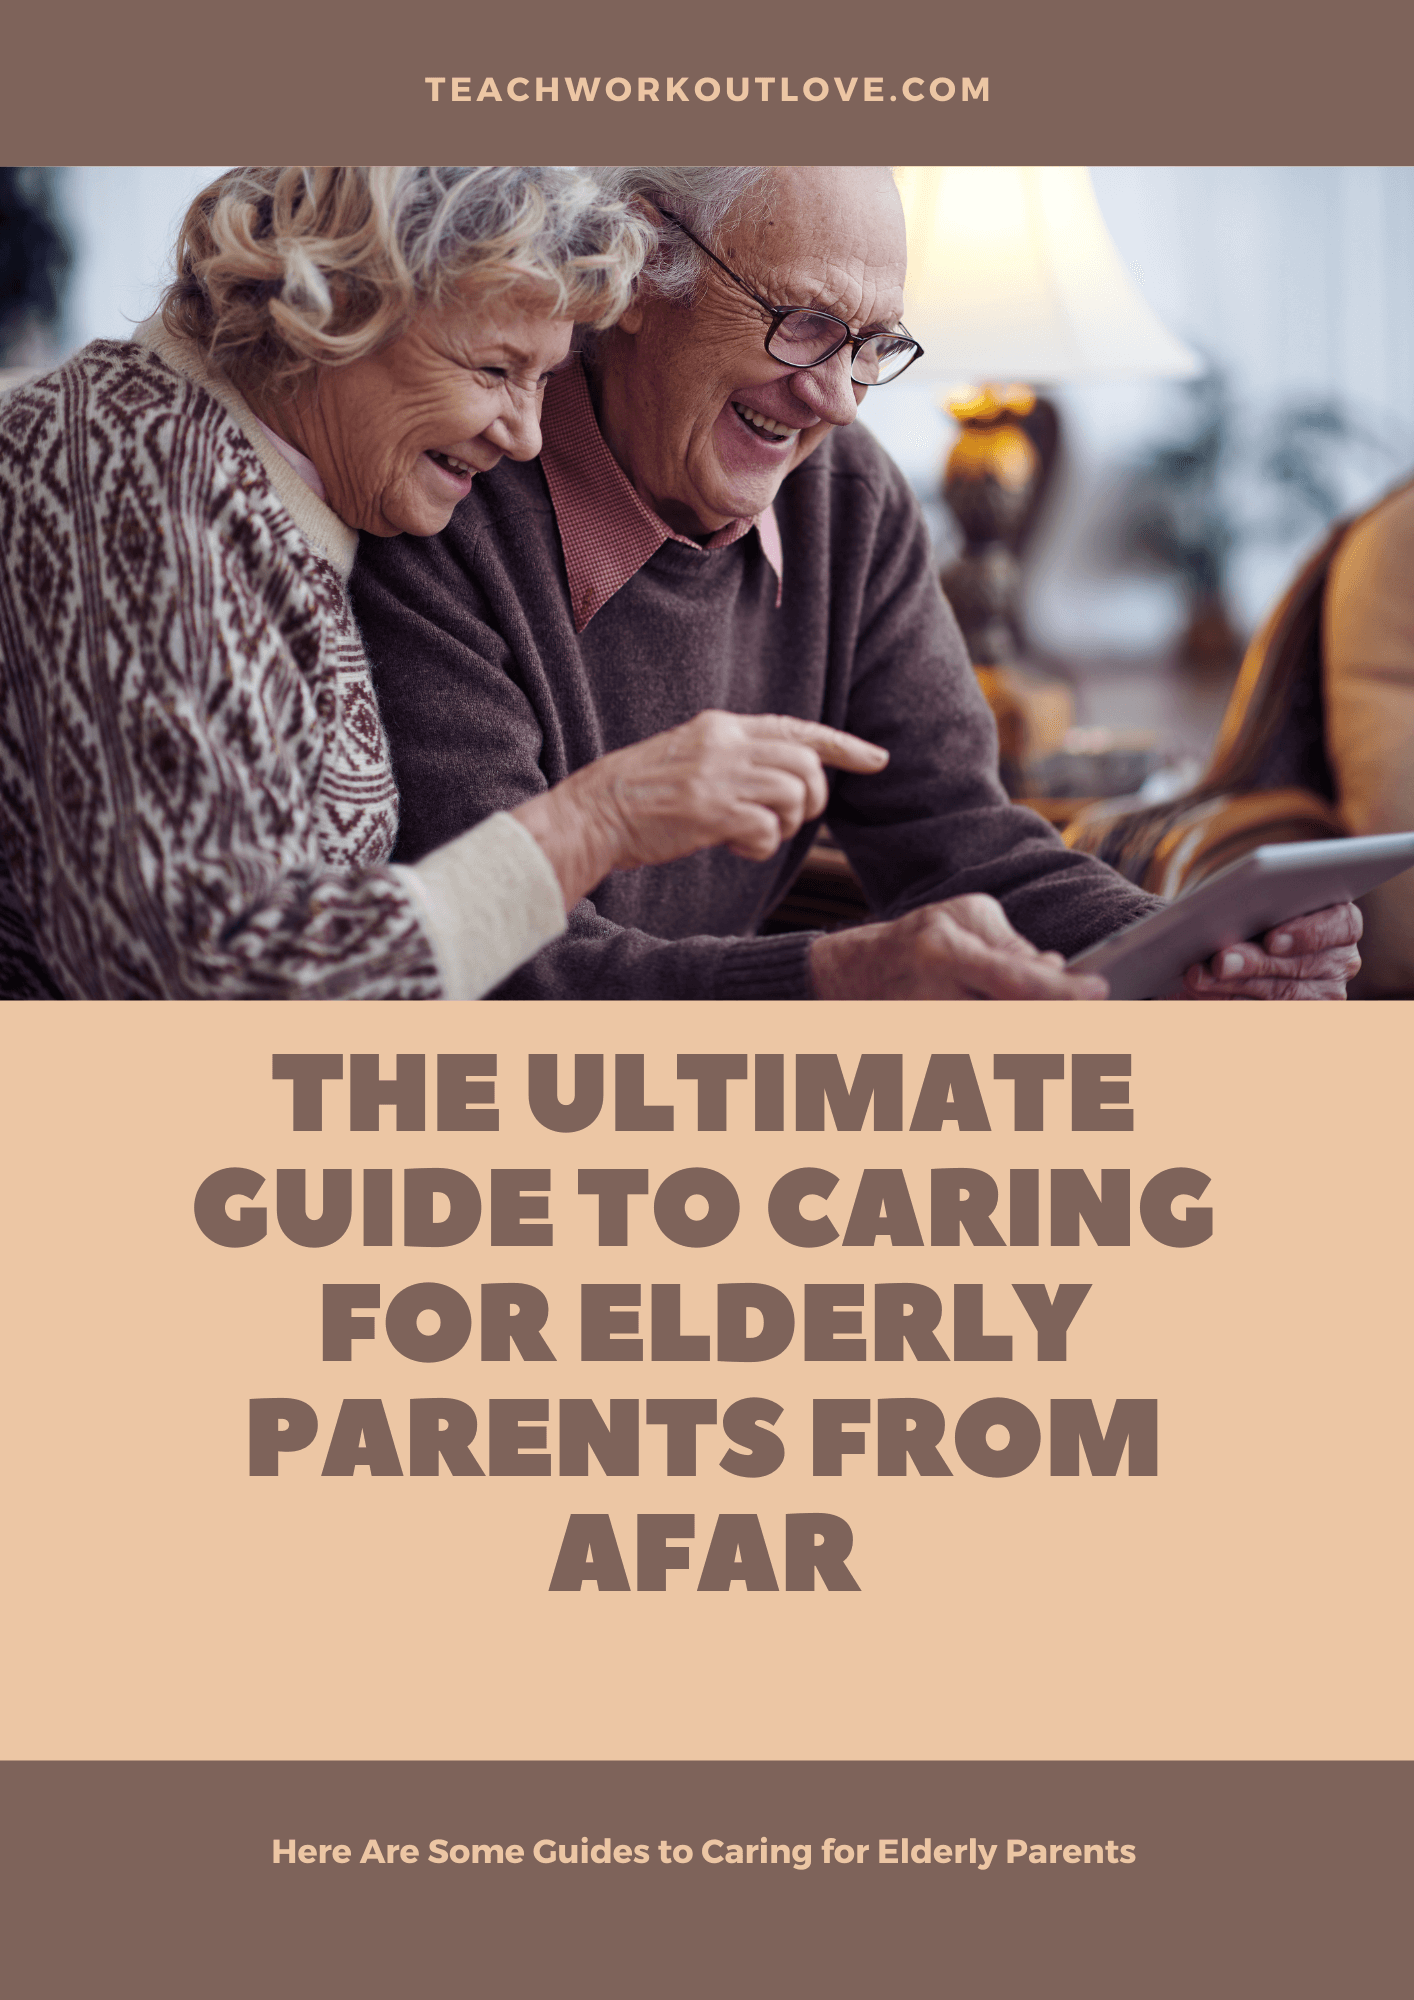 Caring For Elderly Parents from a far